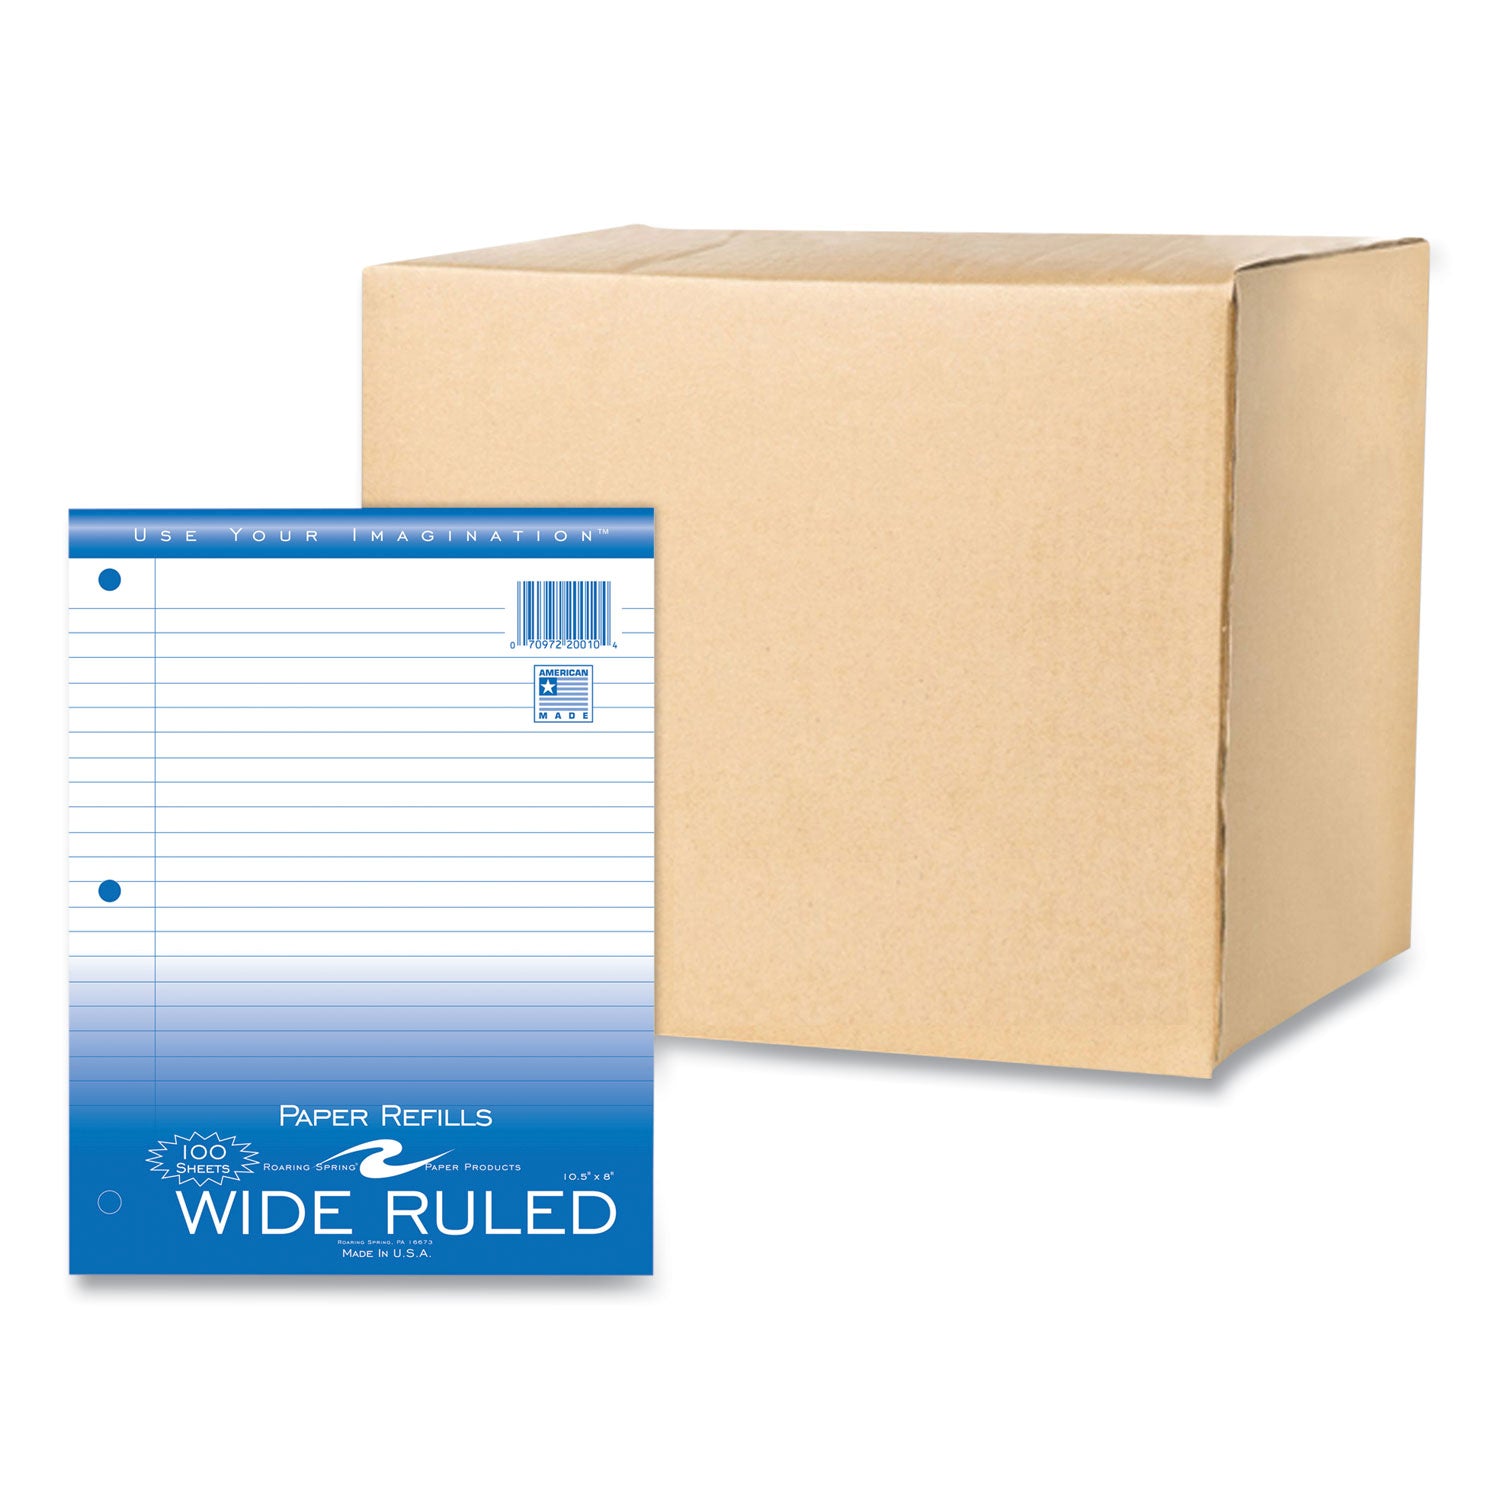 loose-leaf-paper-8-x-105-3-hole-punched-wide-rule-white-100-sheets-pack-48-packs-carton-ships-in-4-6-business-days_roa20010cs - 1